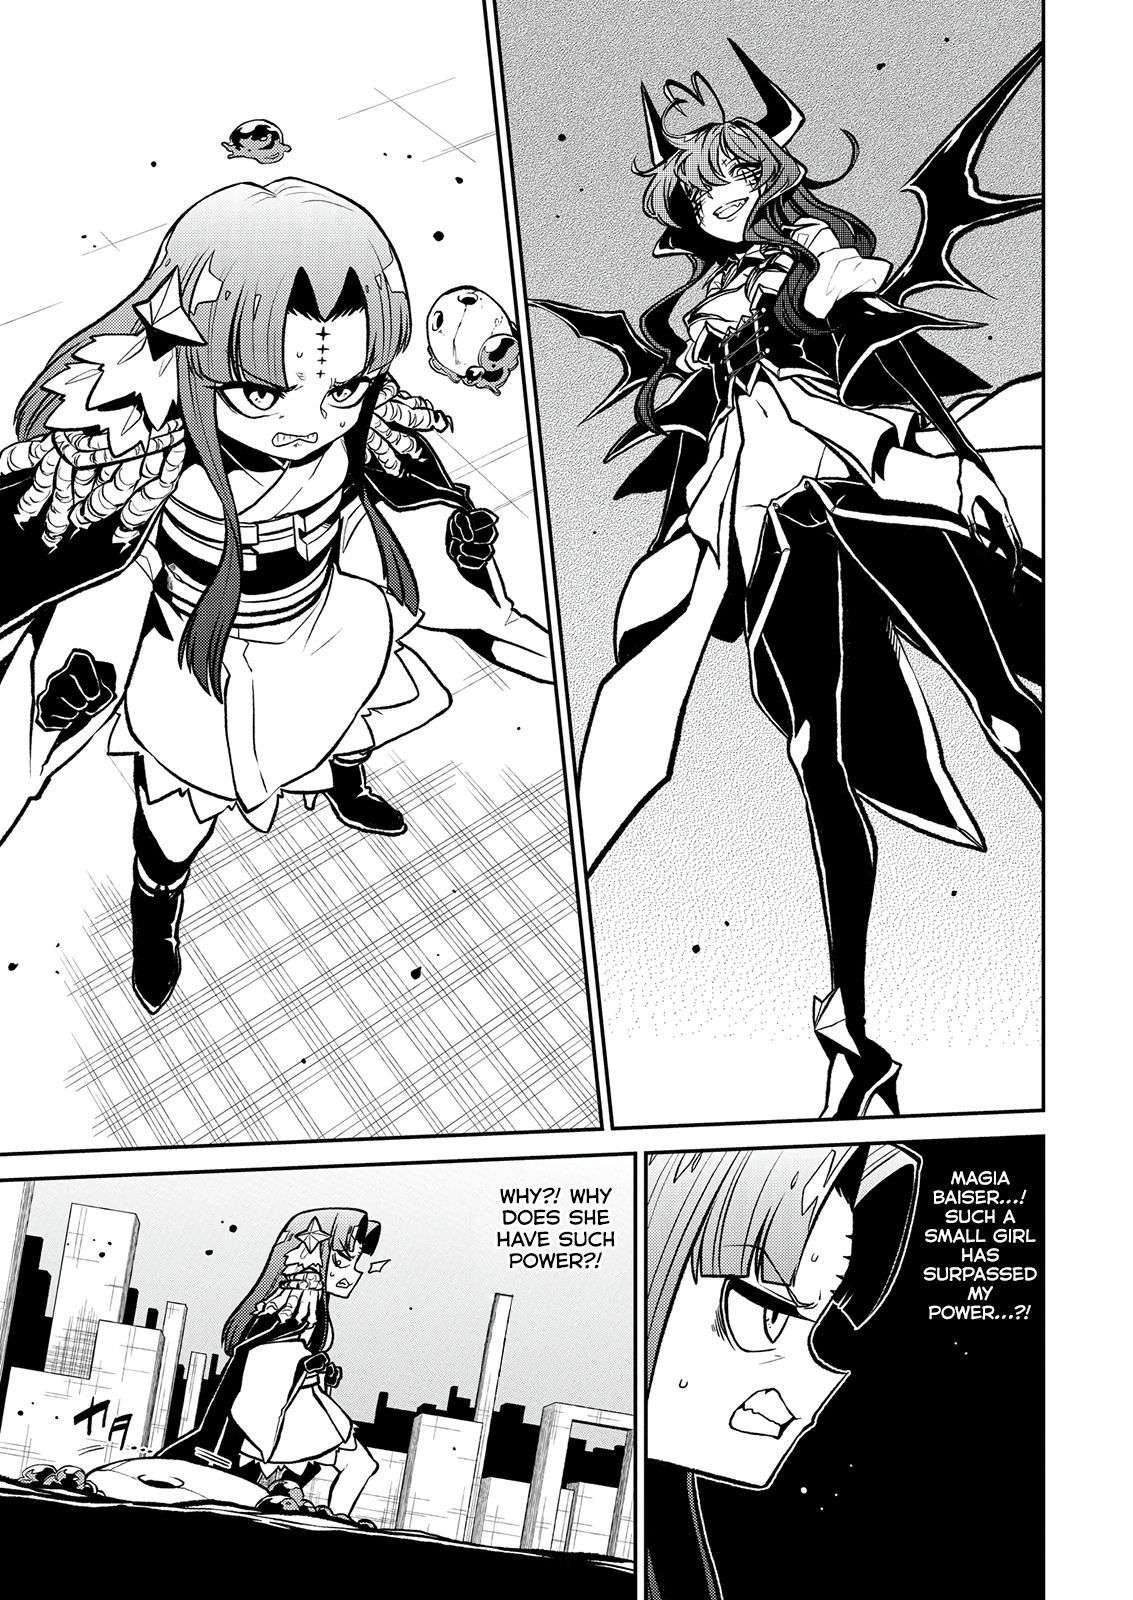 Gushing over Magical Girls - chapter 20 - #4